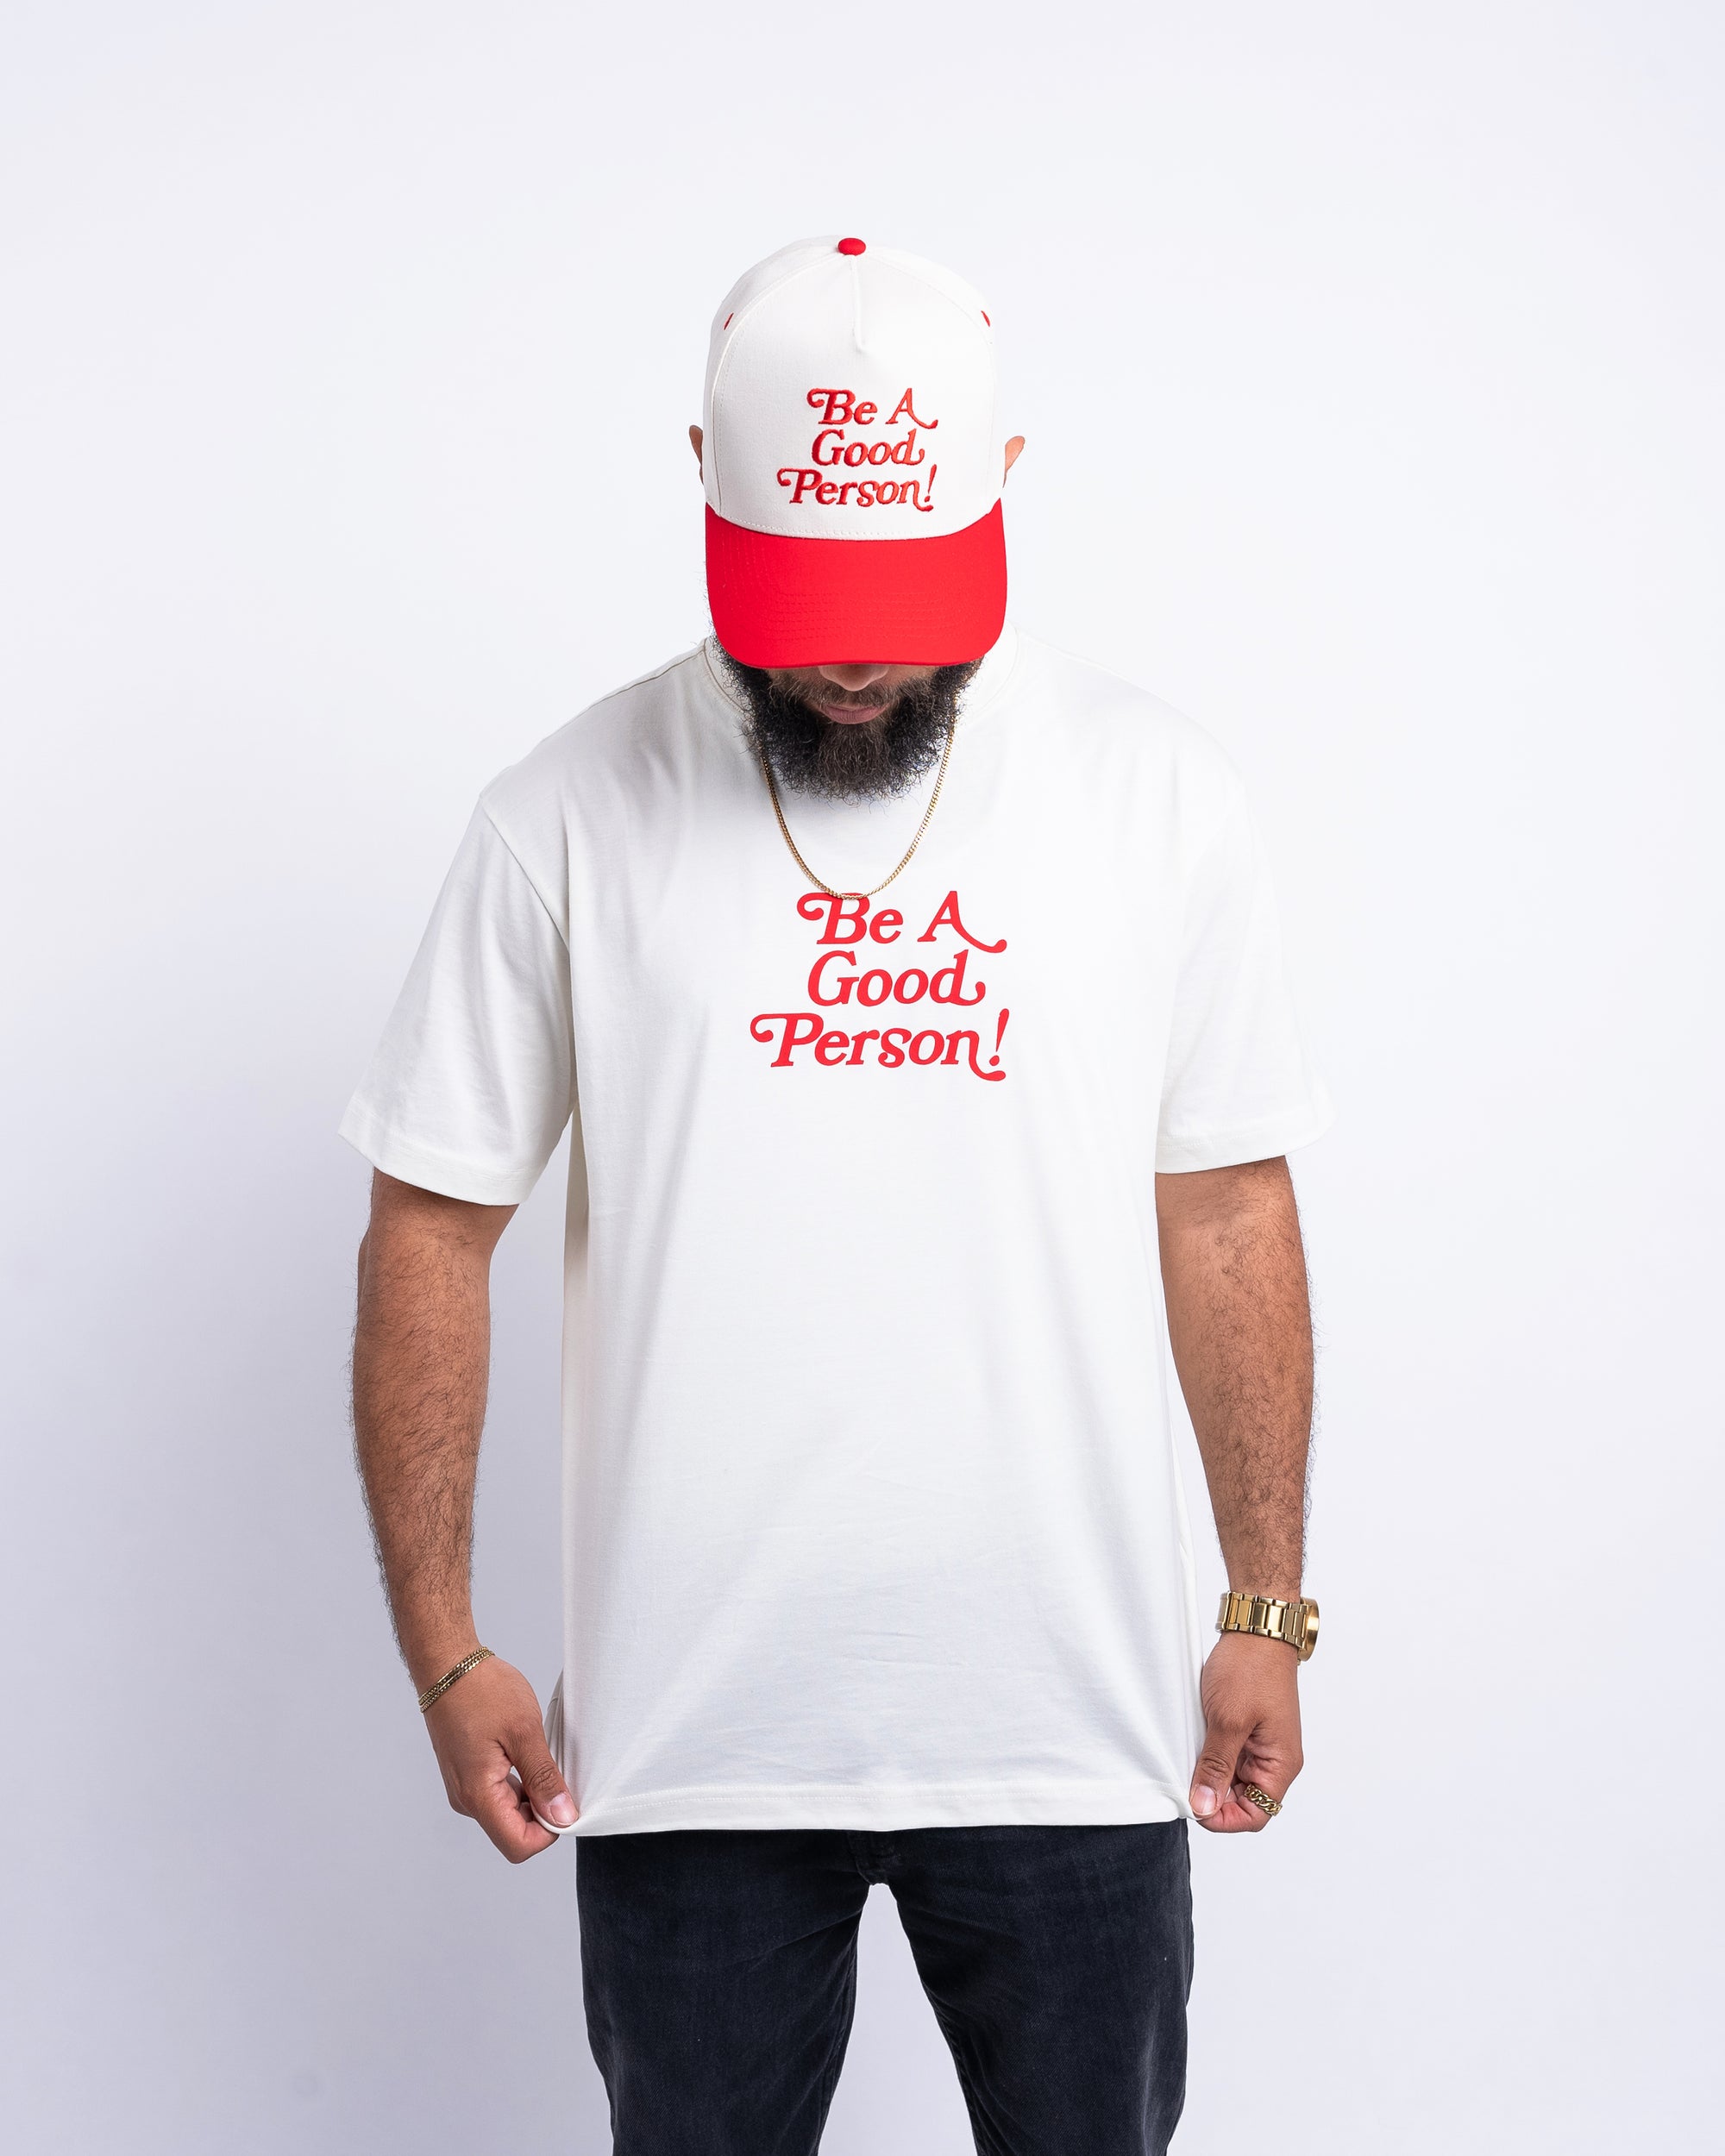 Exclamation T-Shirt - Cream/Red